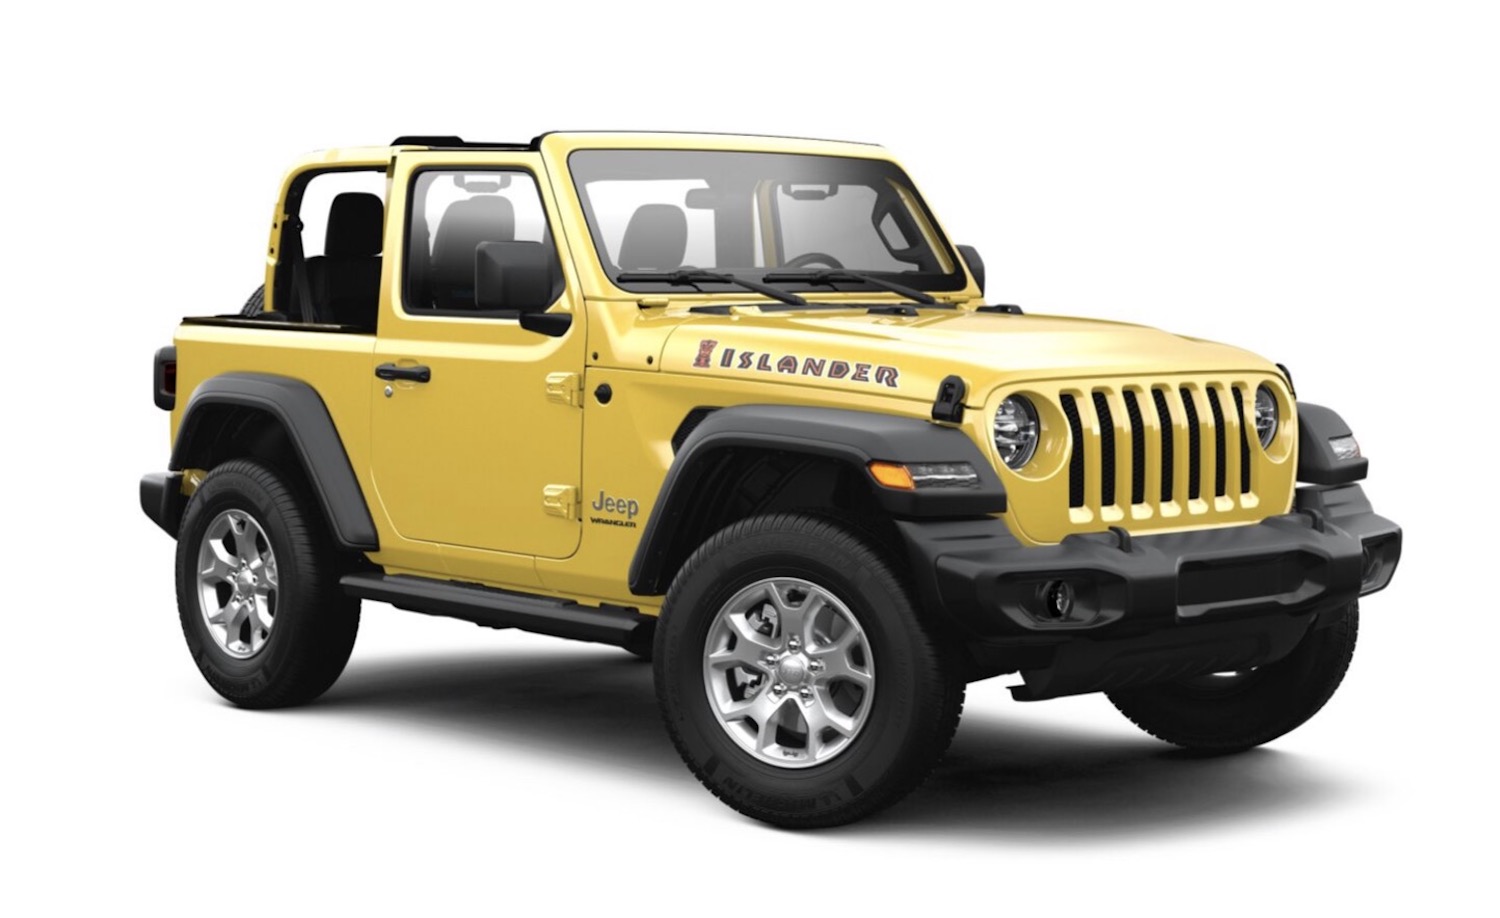 Jeep Wrangler Islander Edition Returns For 2021 After 10 Year Absence